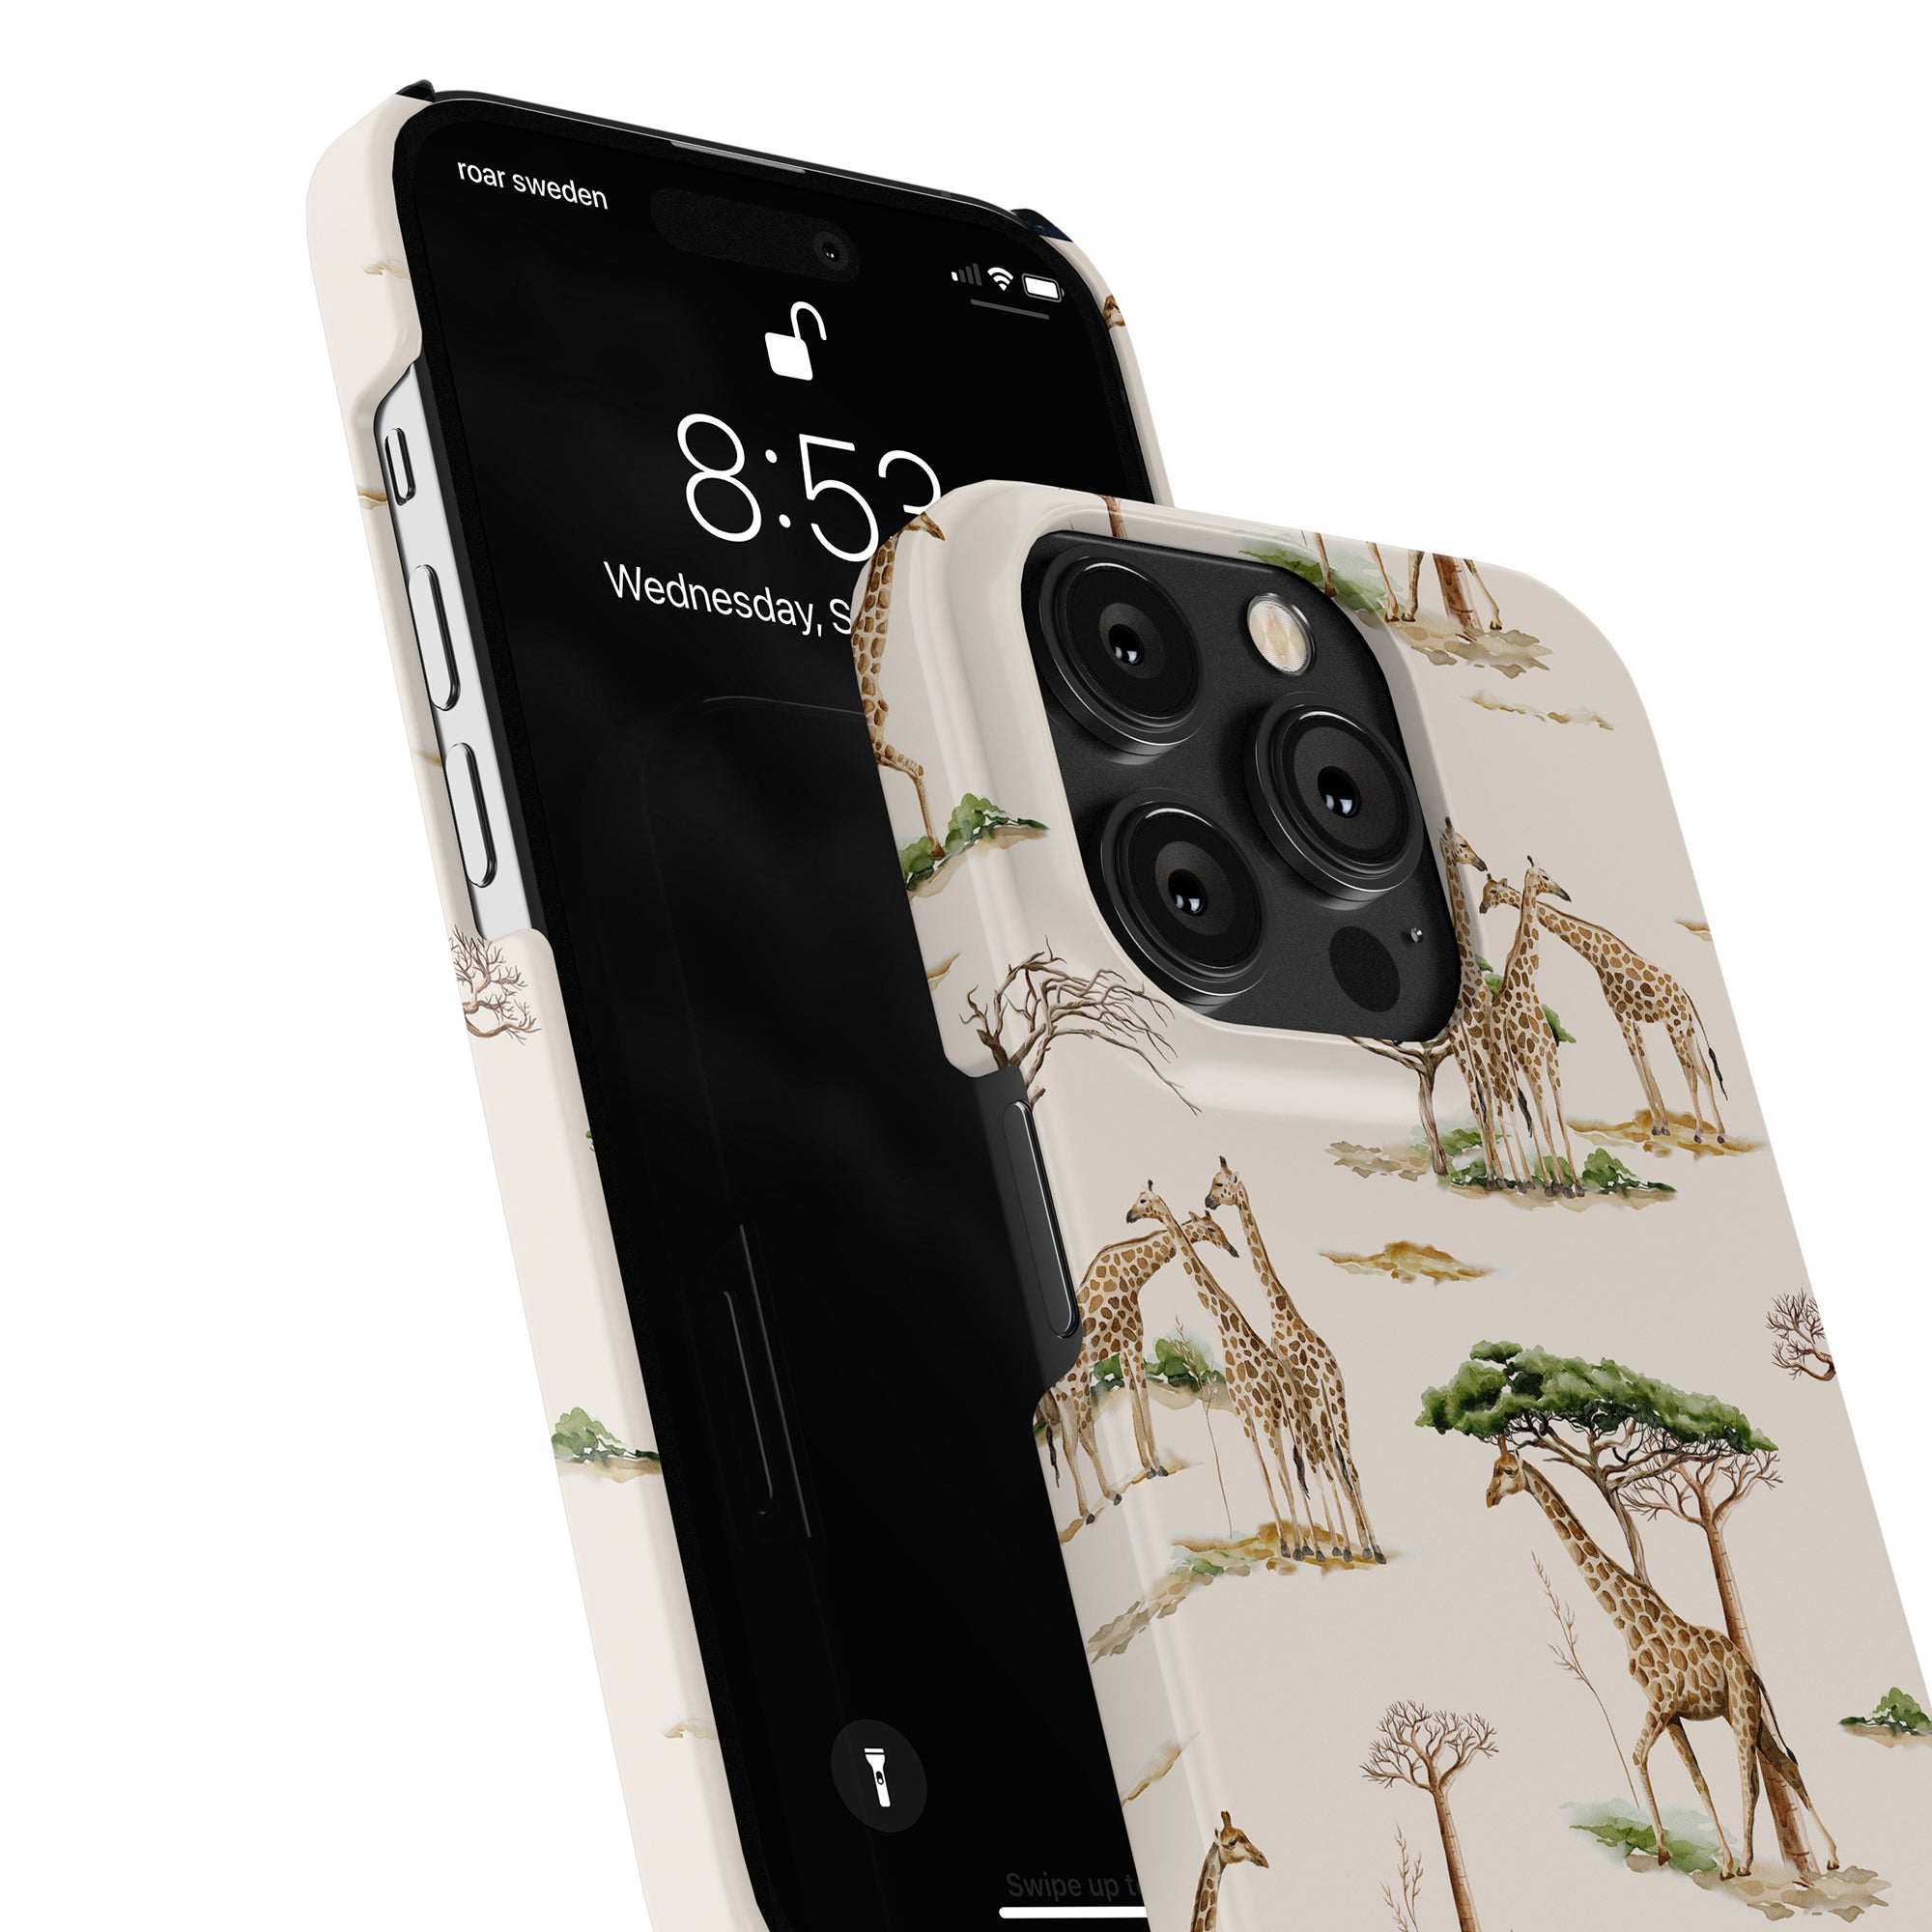 A smartphone with a Giraffa - Slim Case from the Safari Collection, showcasing a giraffe-patterned design and displaying the time 8:53 on Wednesday, September 6. This case not only looks stylish but also offers skydd mot repor och stötar.